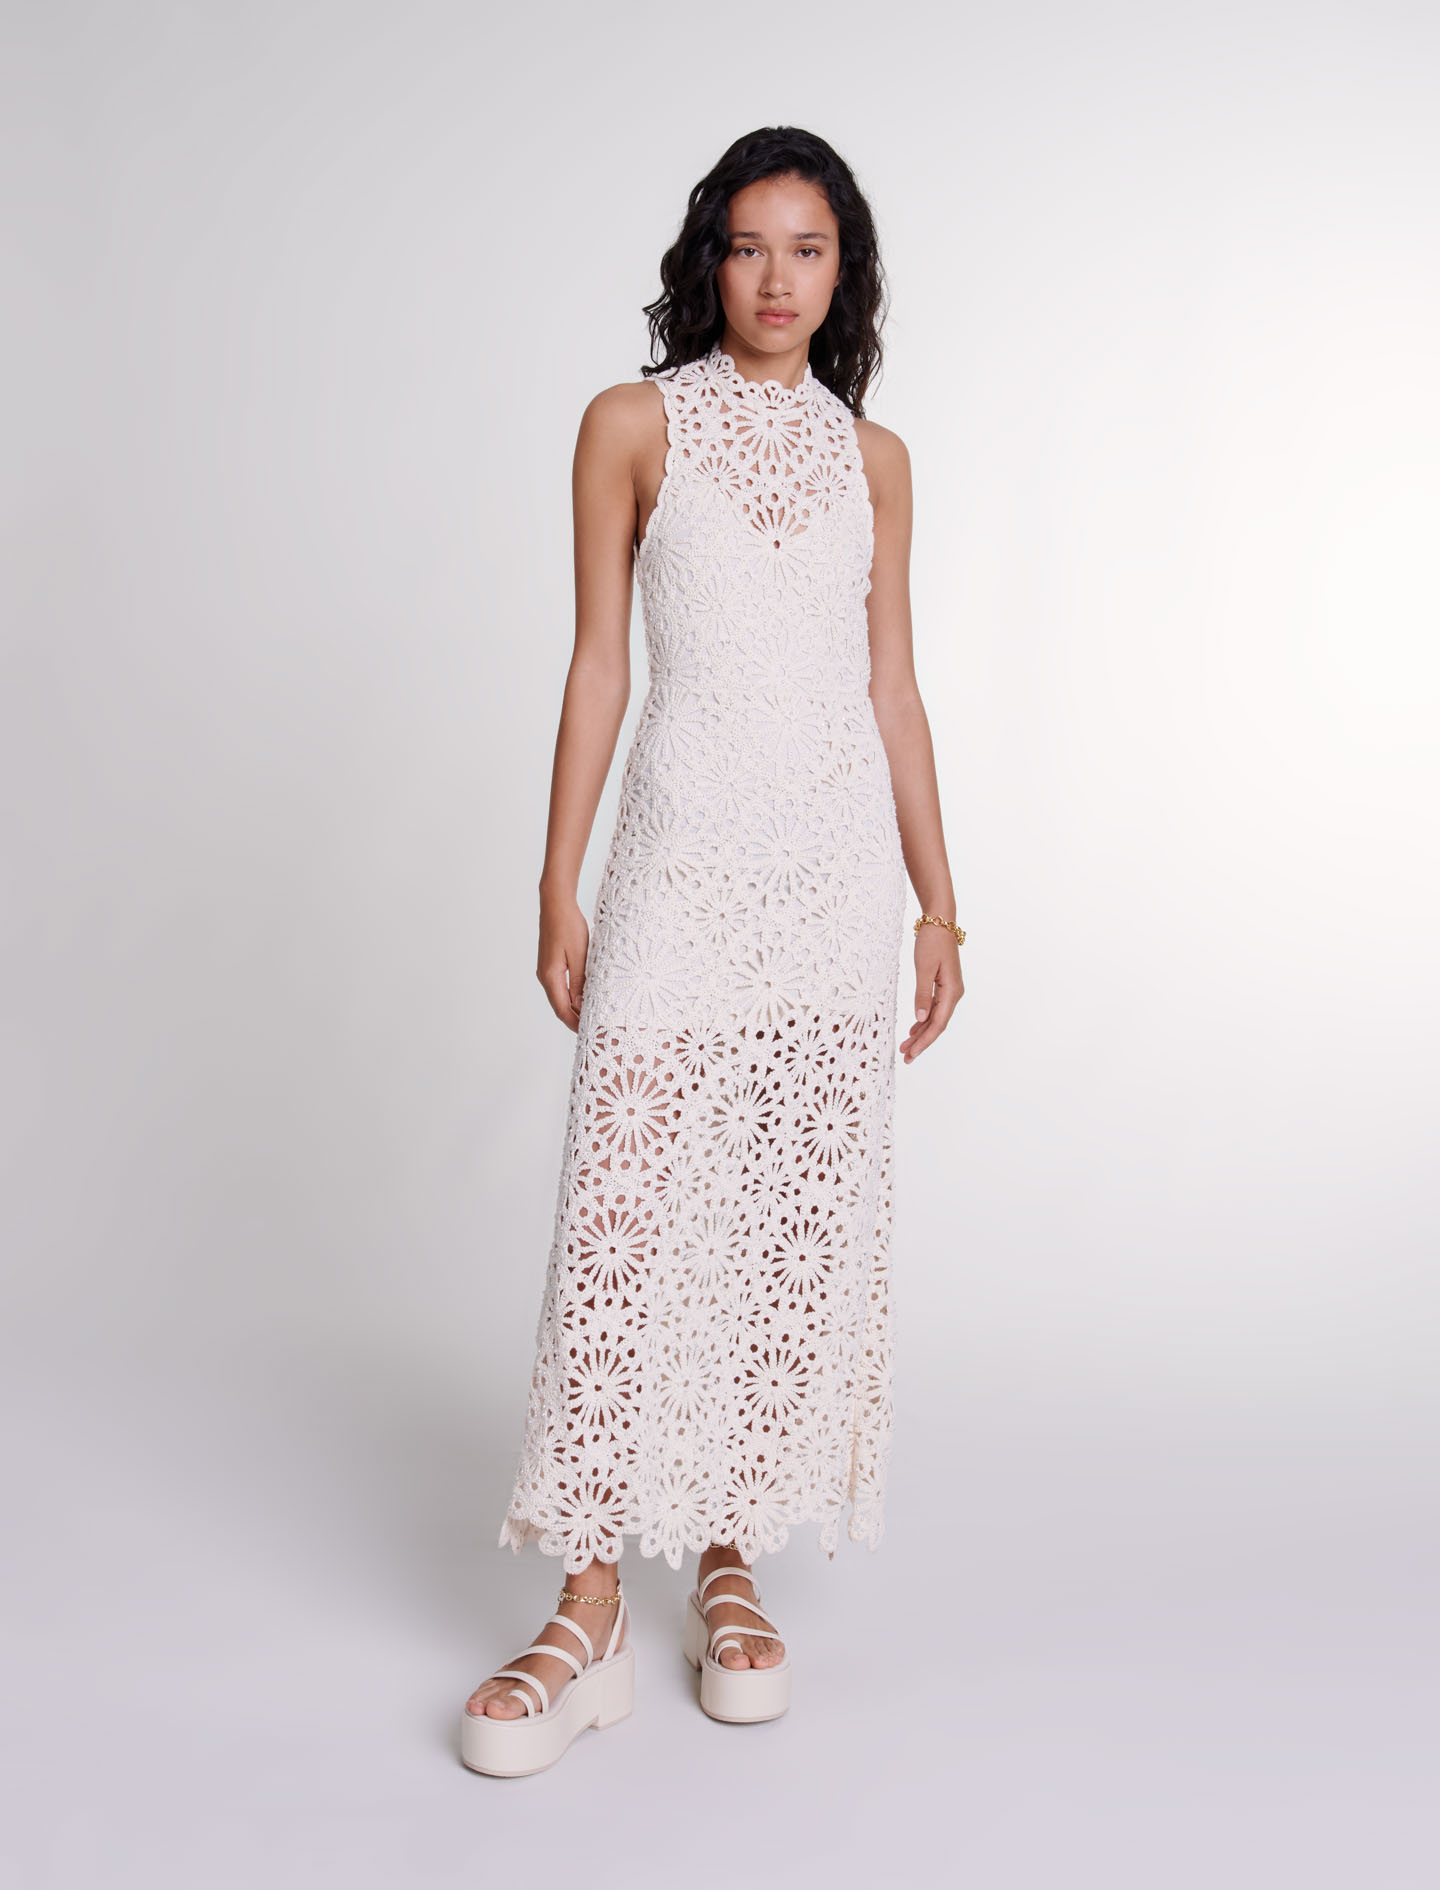 Maje Woman's cotton Lining: Beaded crochet maxi dress for Spring/Summer, in color Ecru / Beige